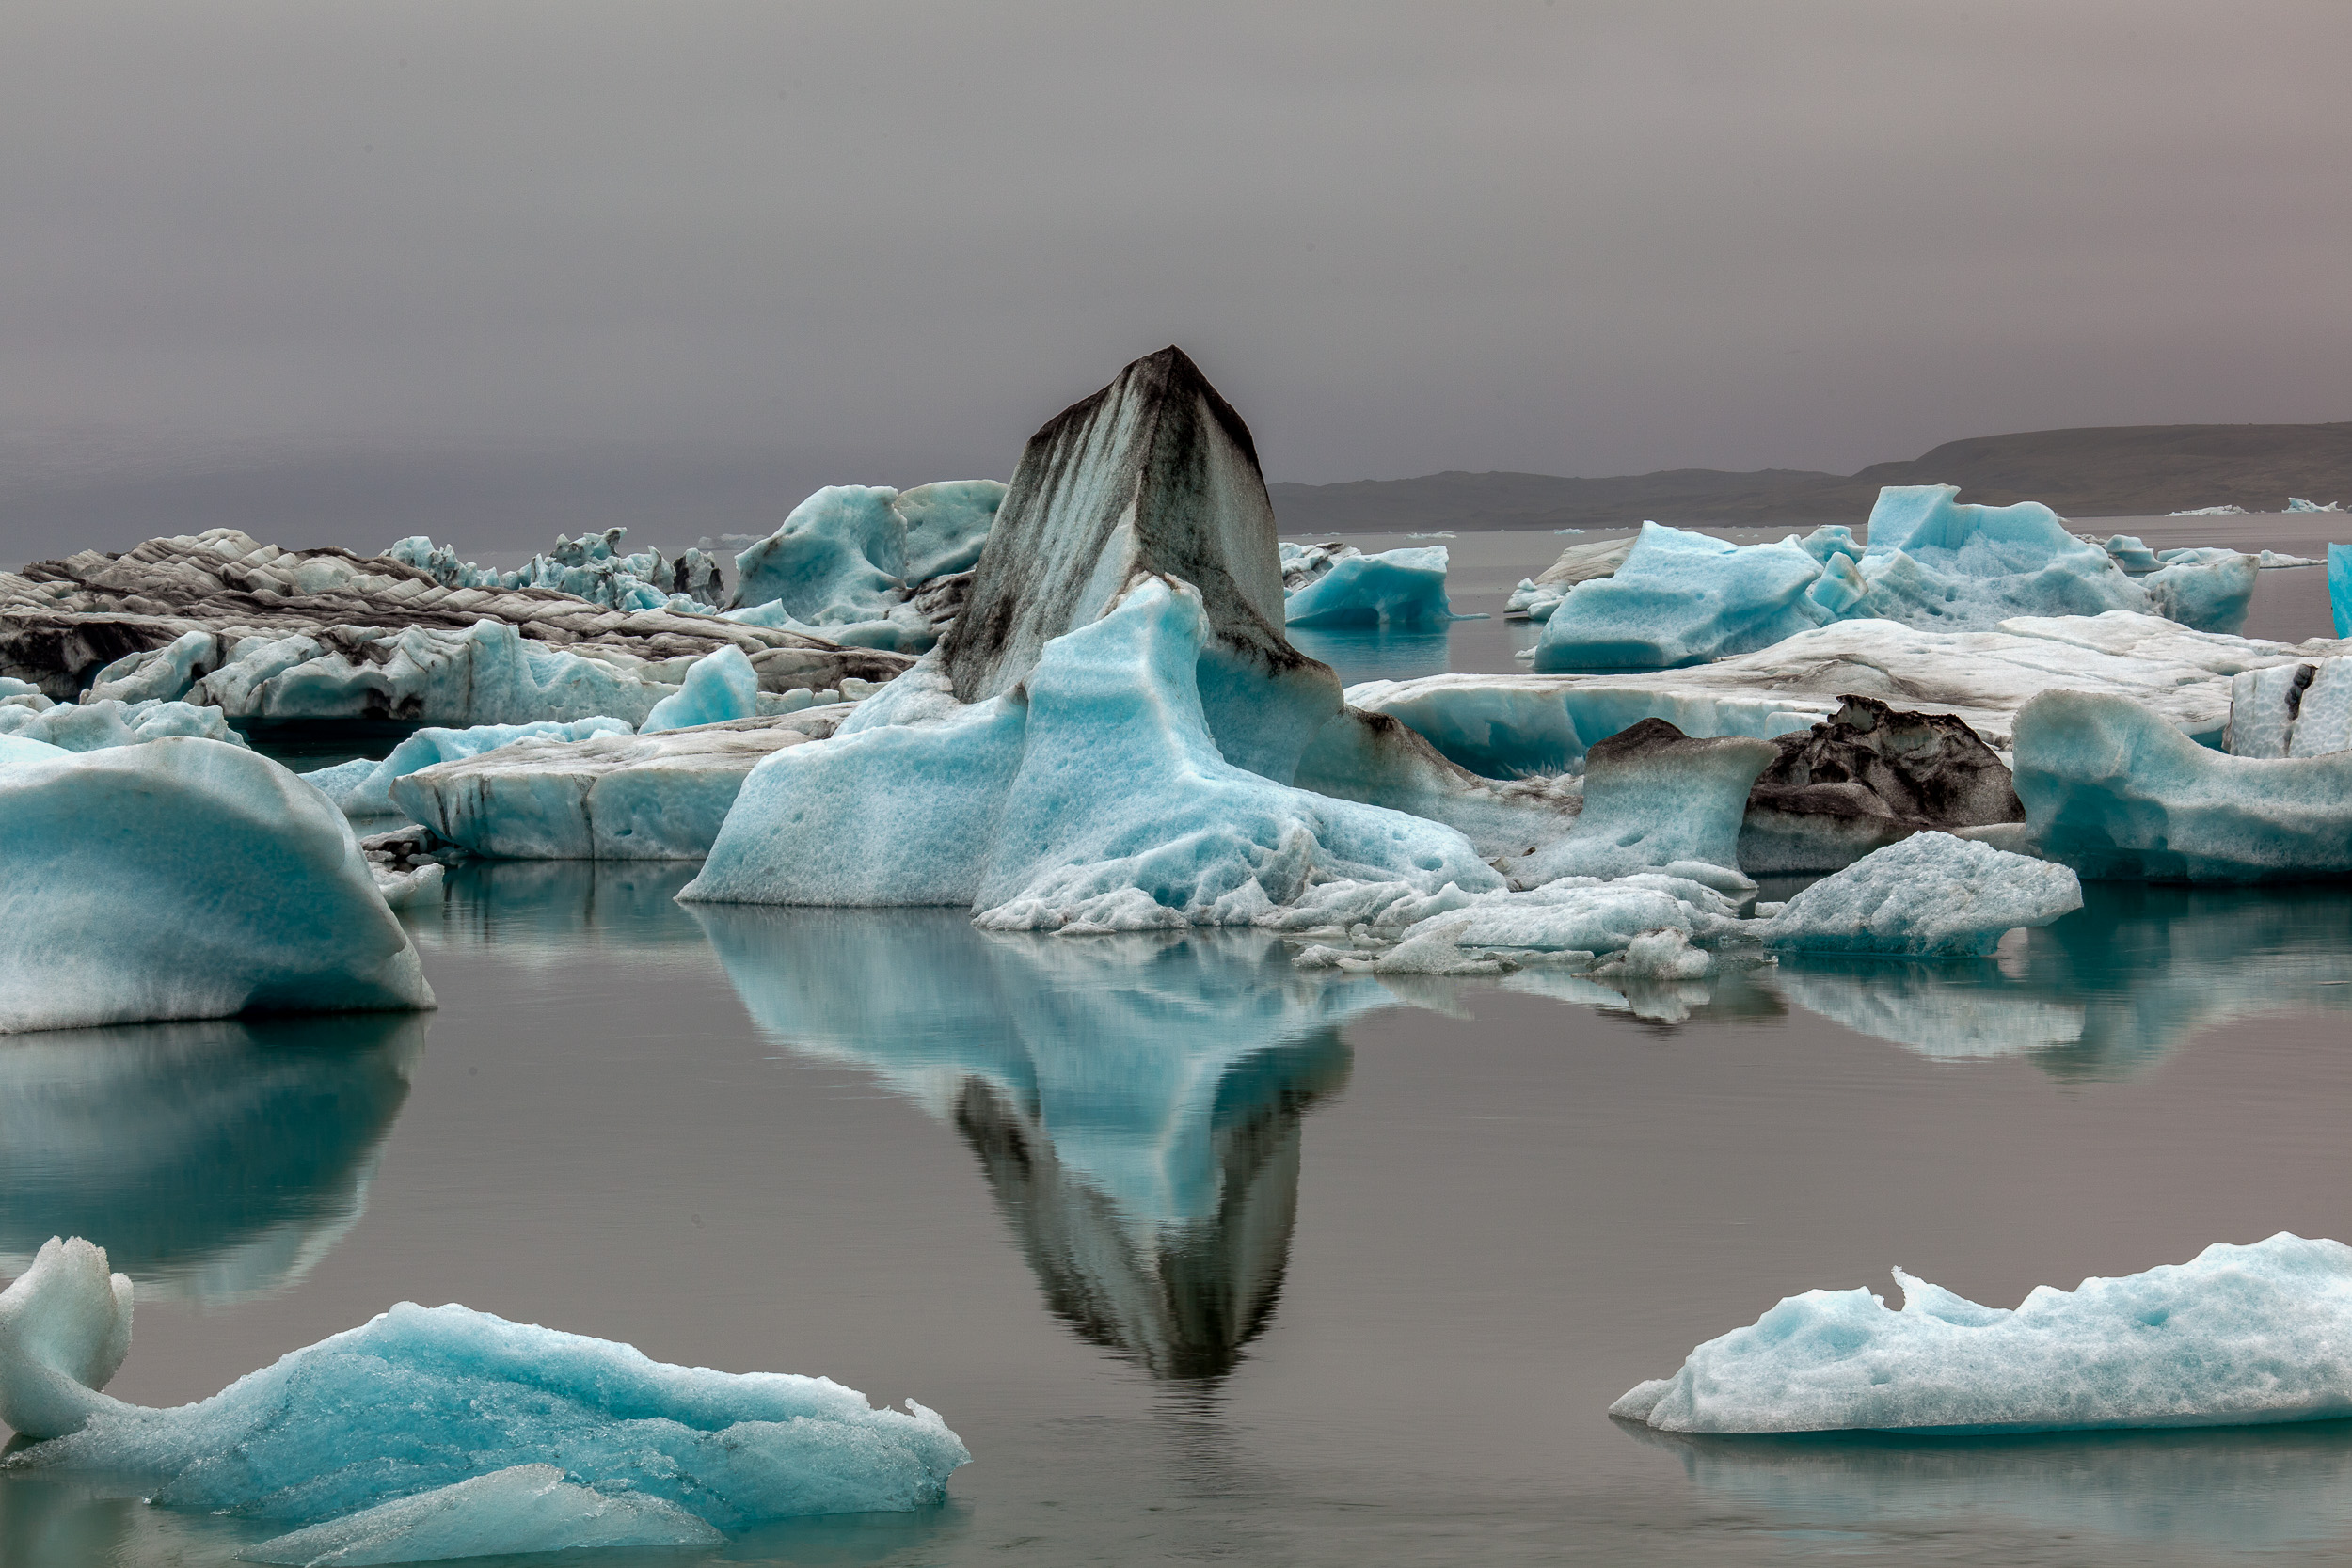 Large icebergs create stunning formations and a beautiful reflection on the Jokulsarlon Glacier Lagoon in Iceland .